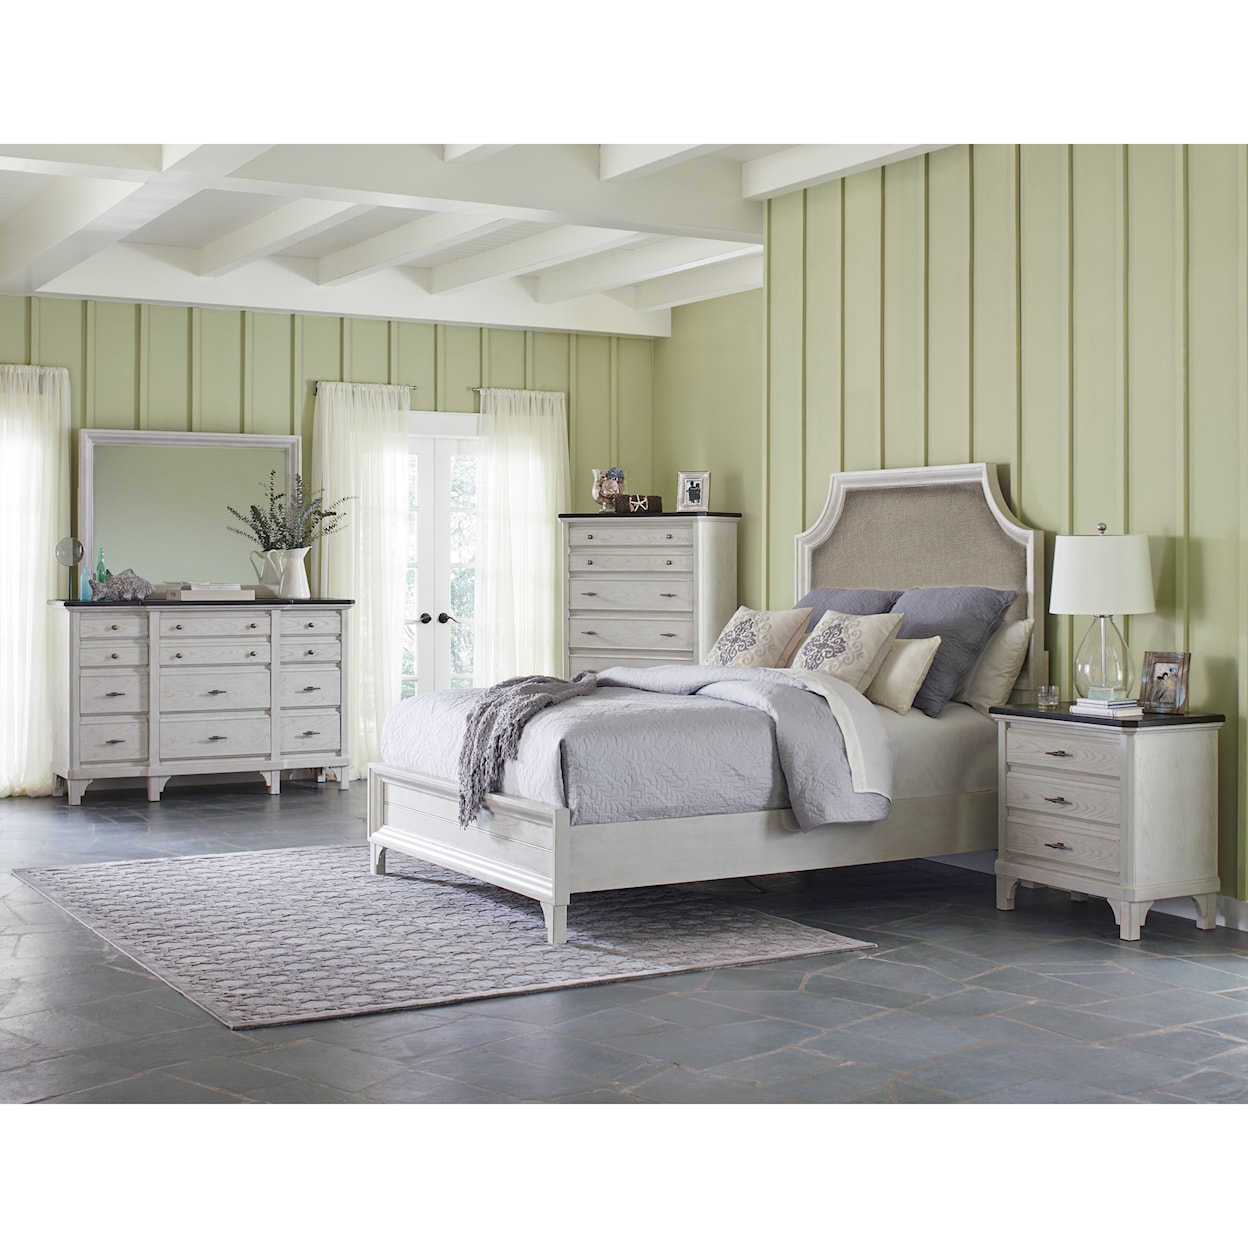 Avalon Furniture Mystic Cay Queen Bedroom Group